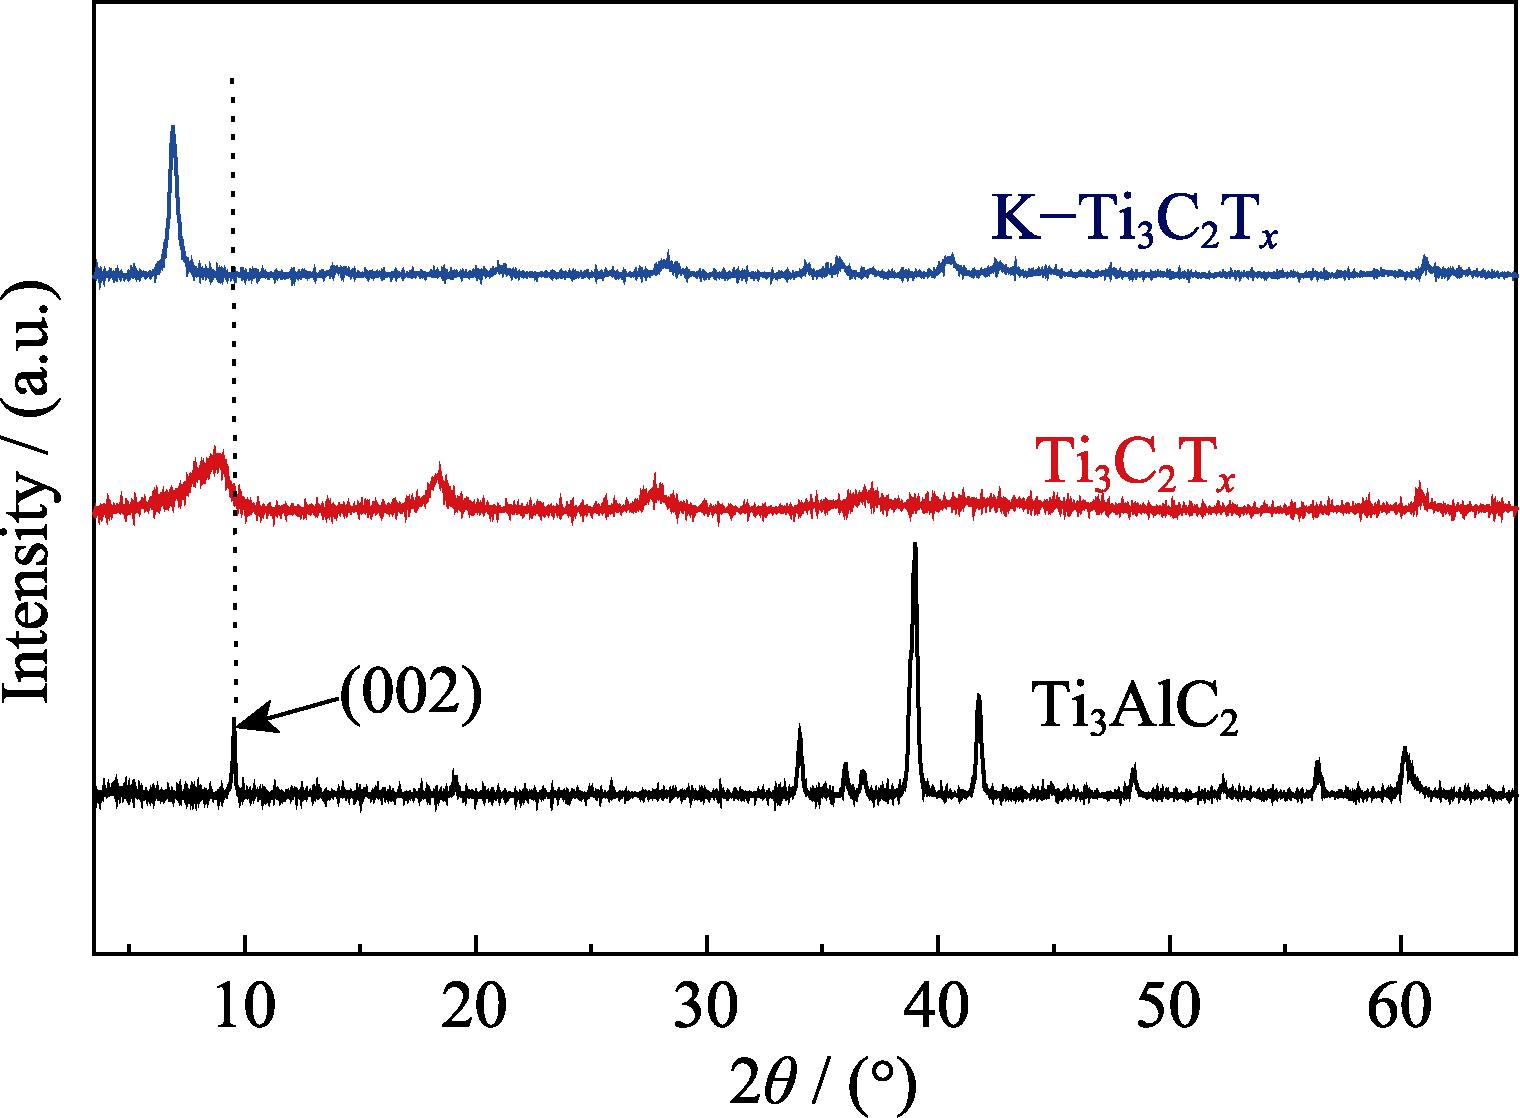 XRD patterns of the synthesized Ti3AlC2、Ti3C2Tx and K-Ti3C2Tx